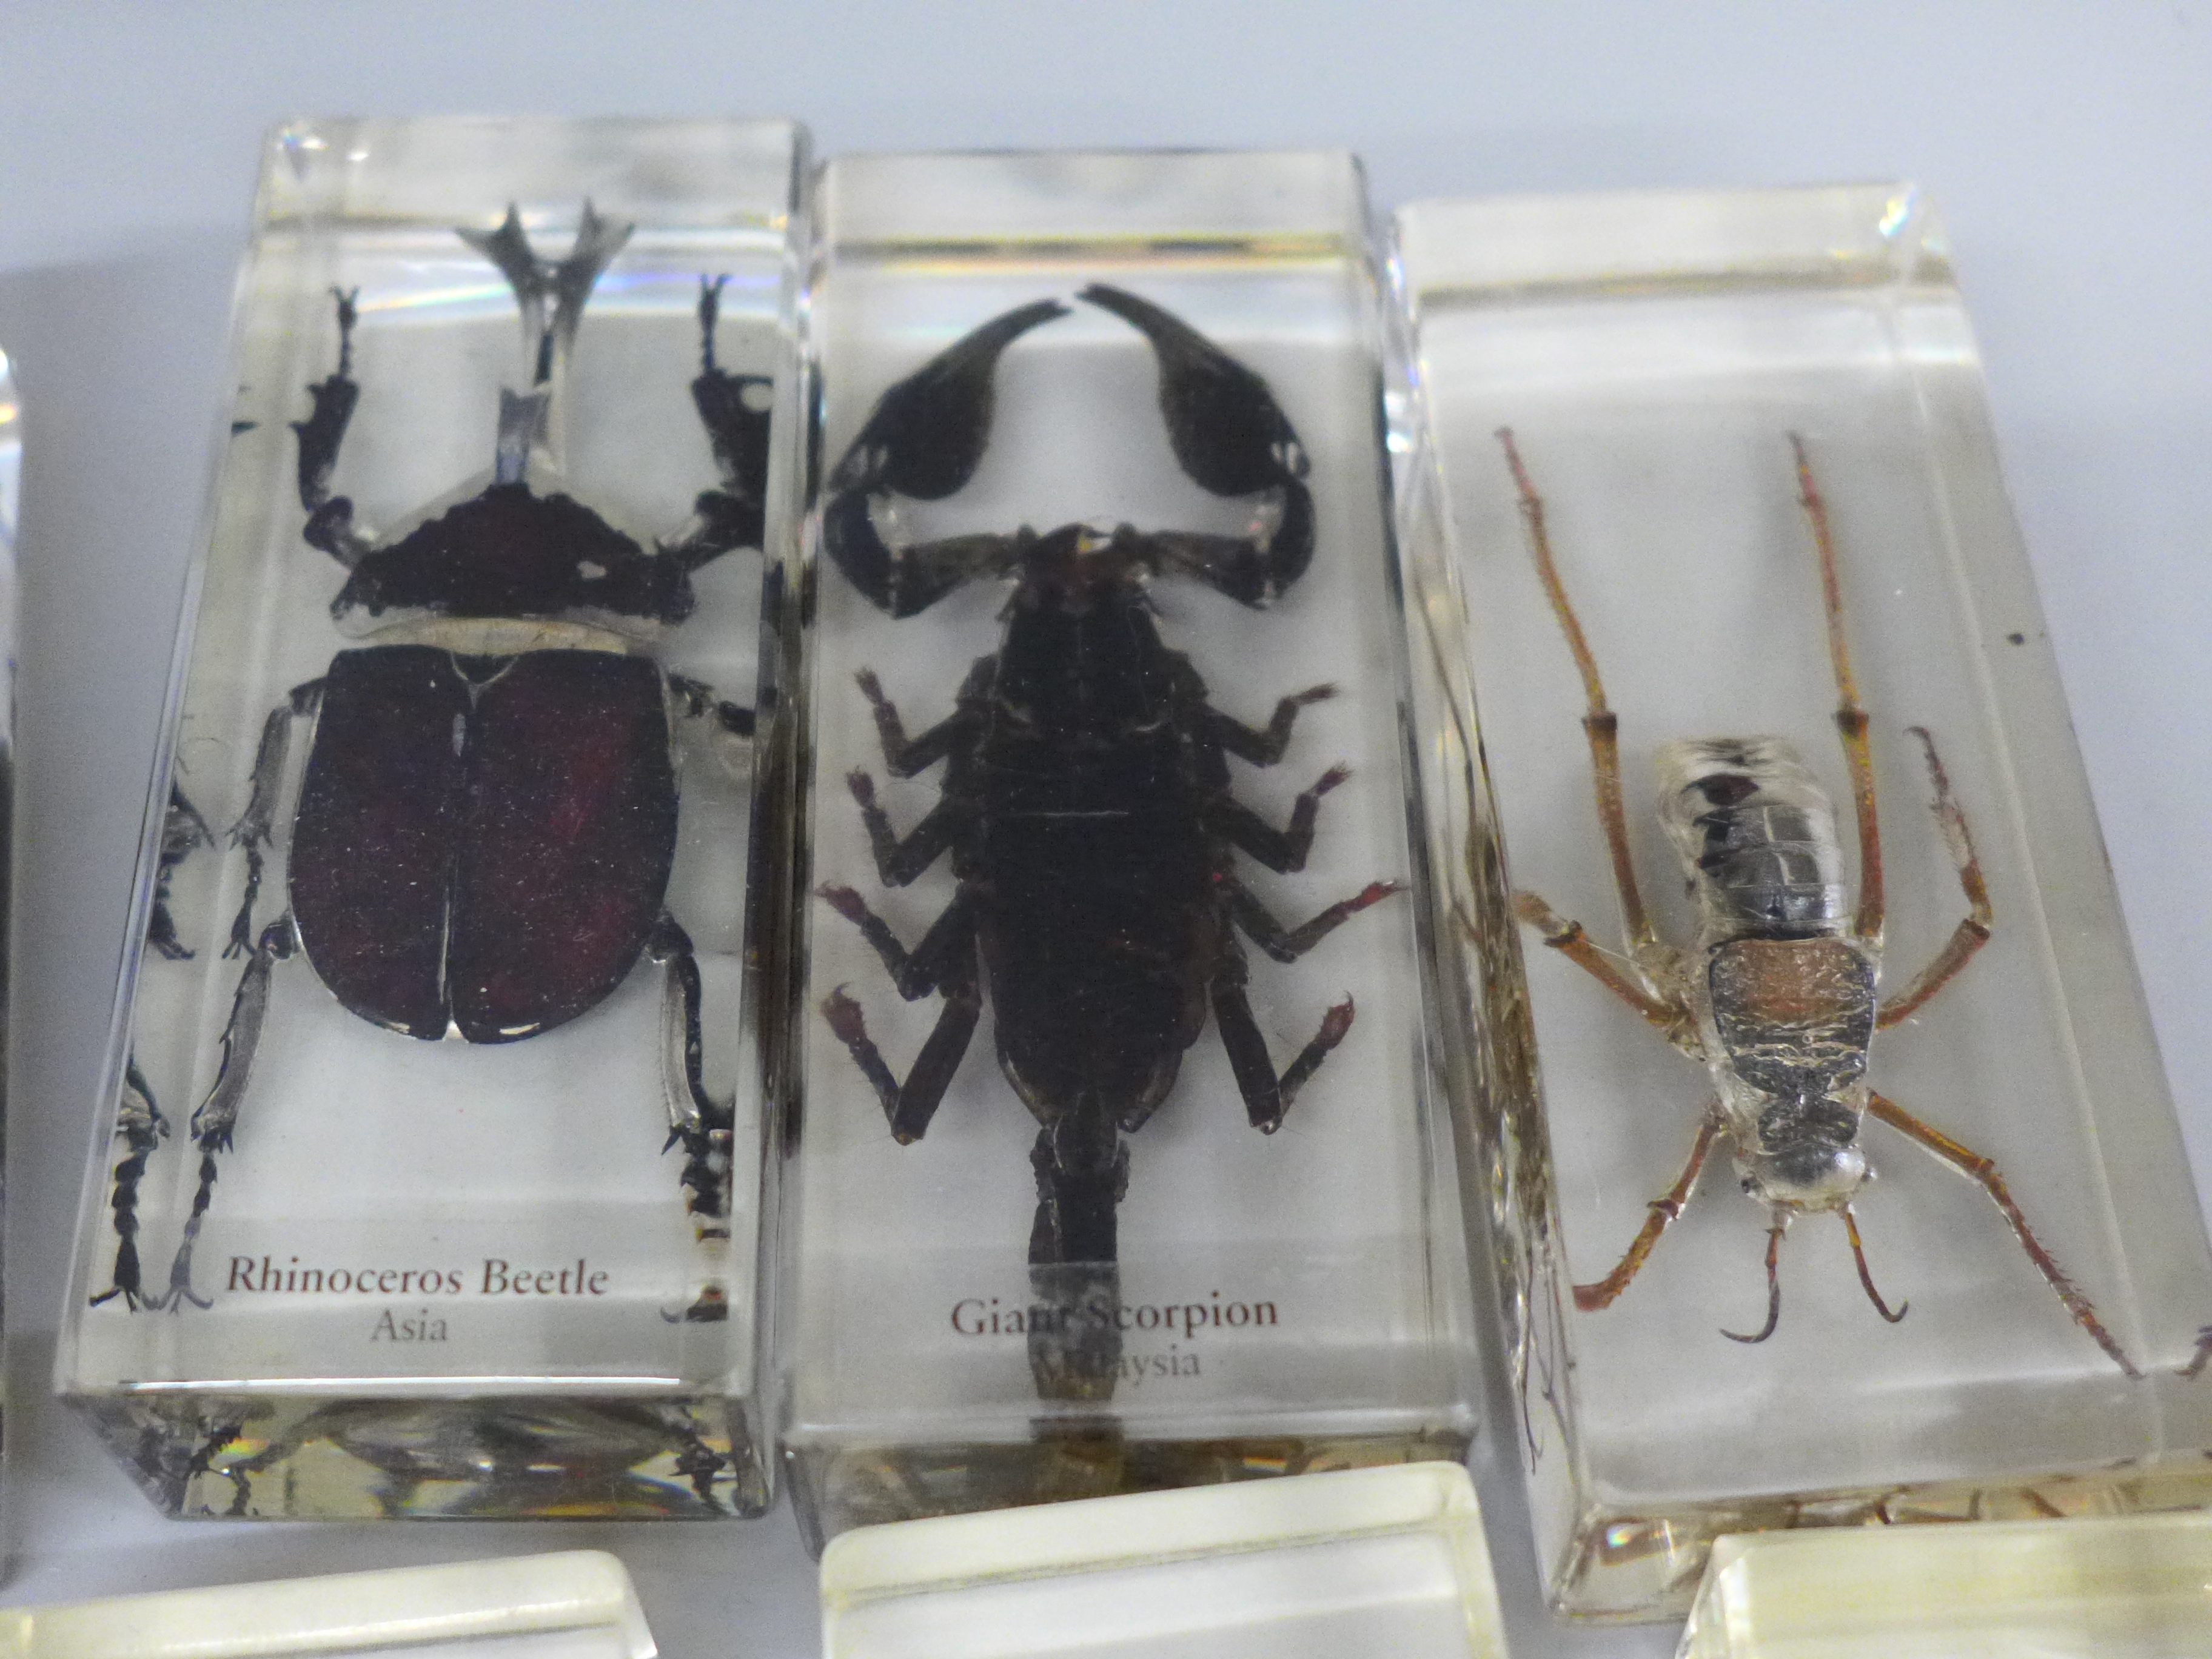 Eight insect specimens in resin, including Giant Scorpion and Rhinoceros Beetle - Image 2 of 4